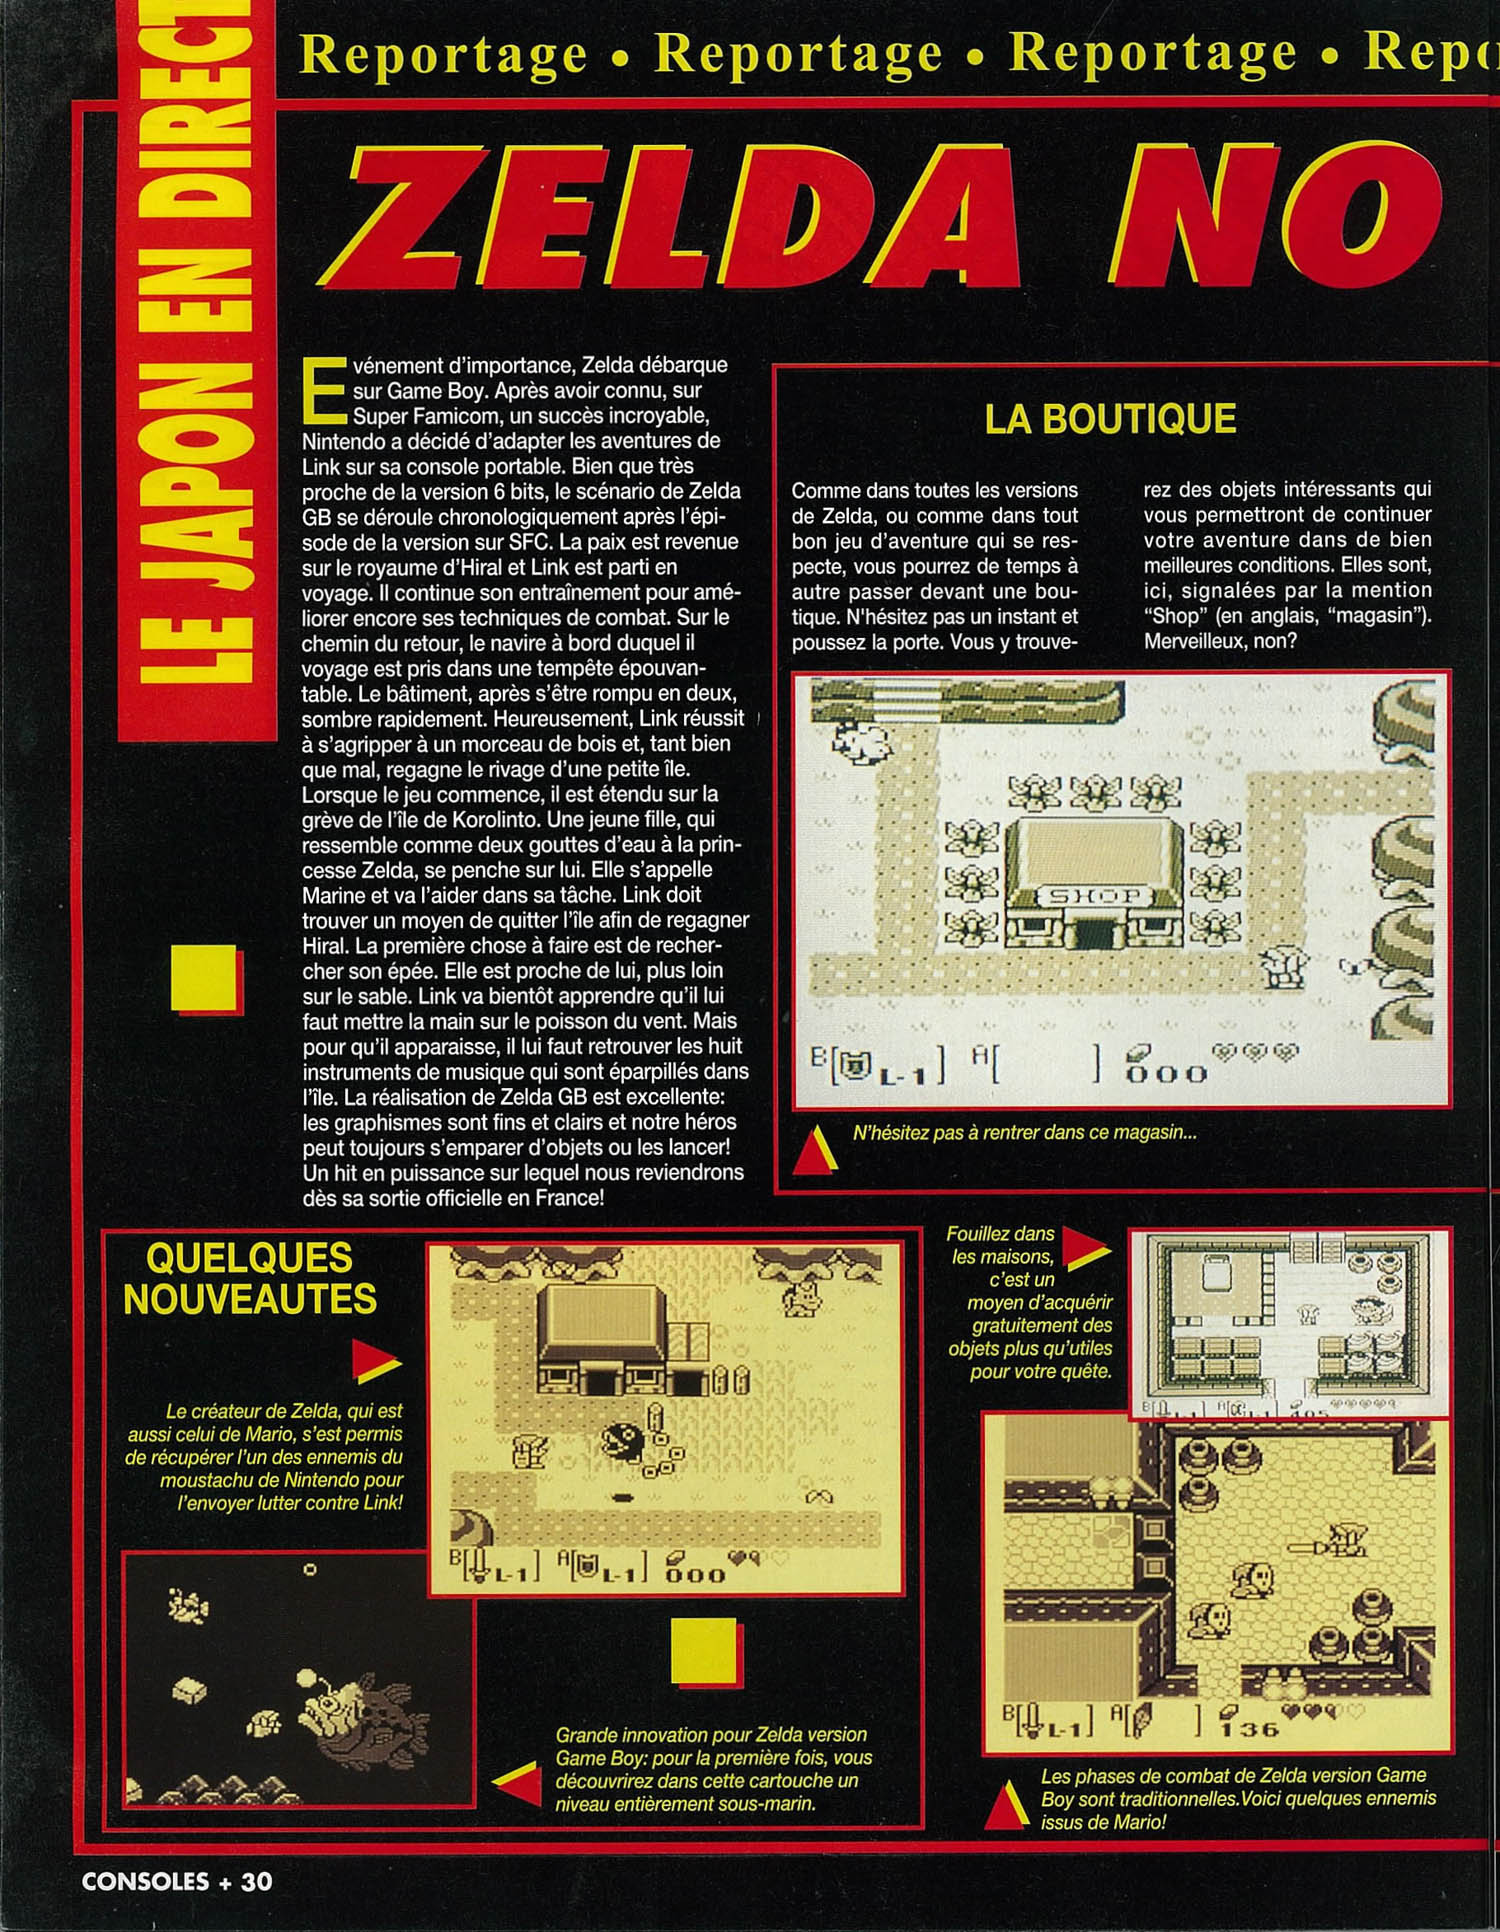 tests//56/Consoles + 023 - Page 030 (septembre 1993).jpg